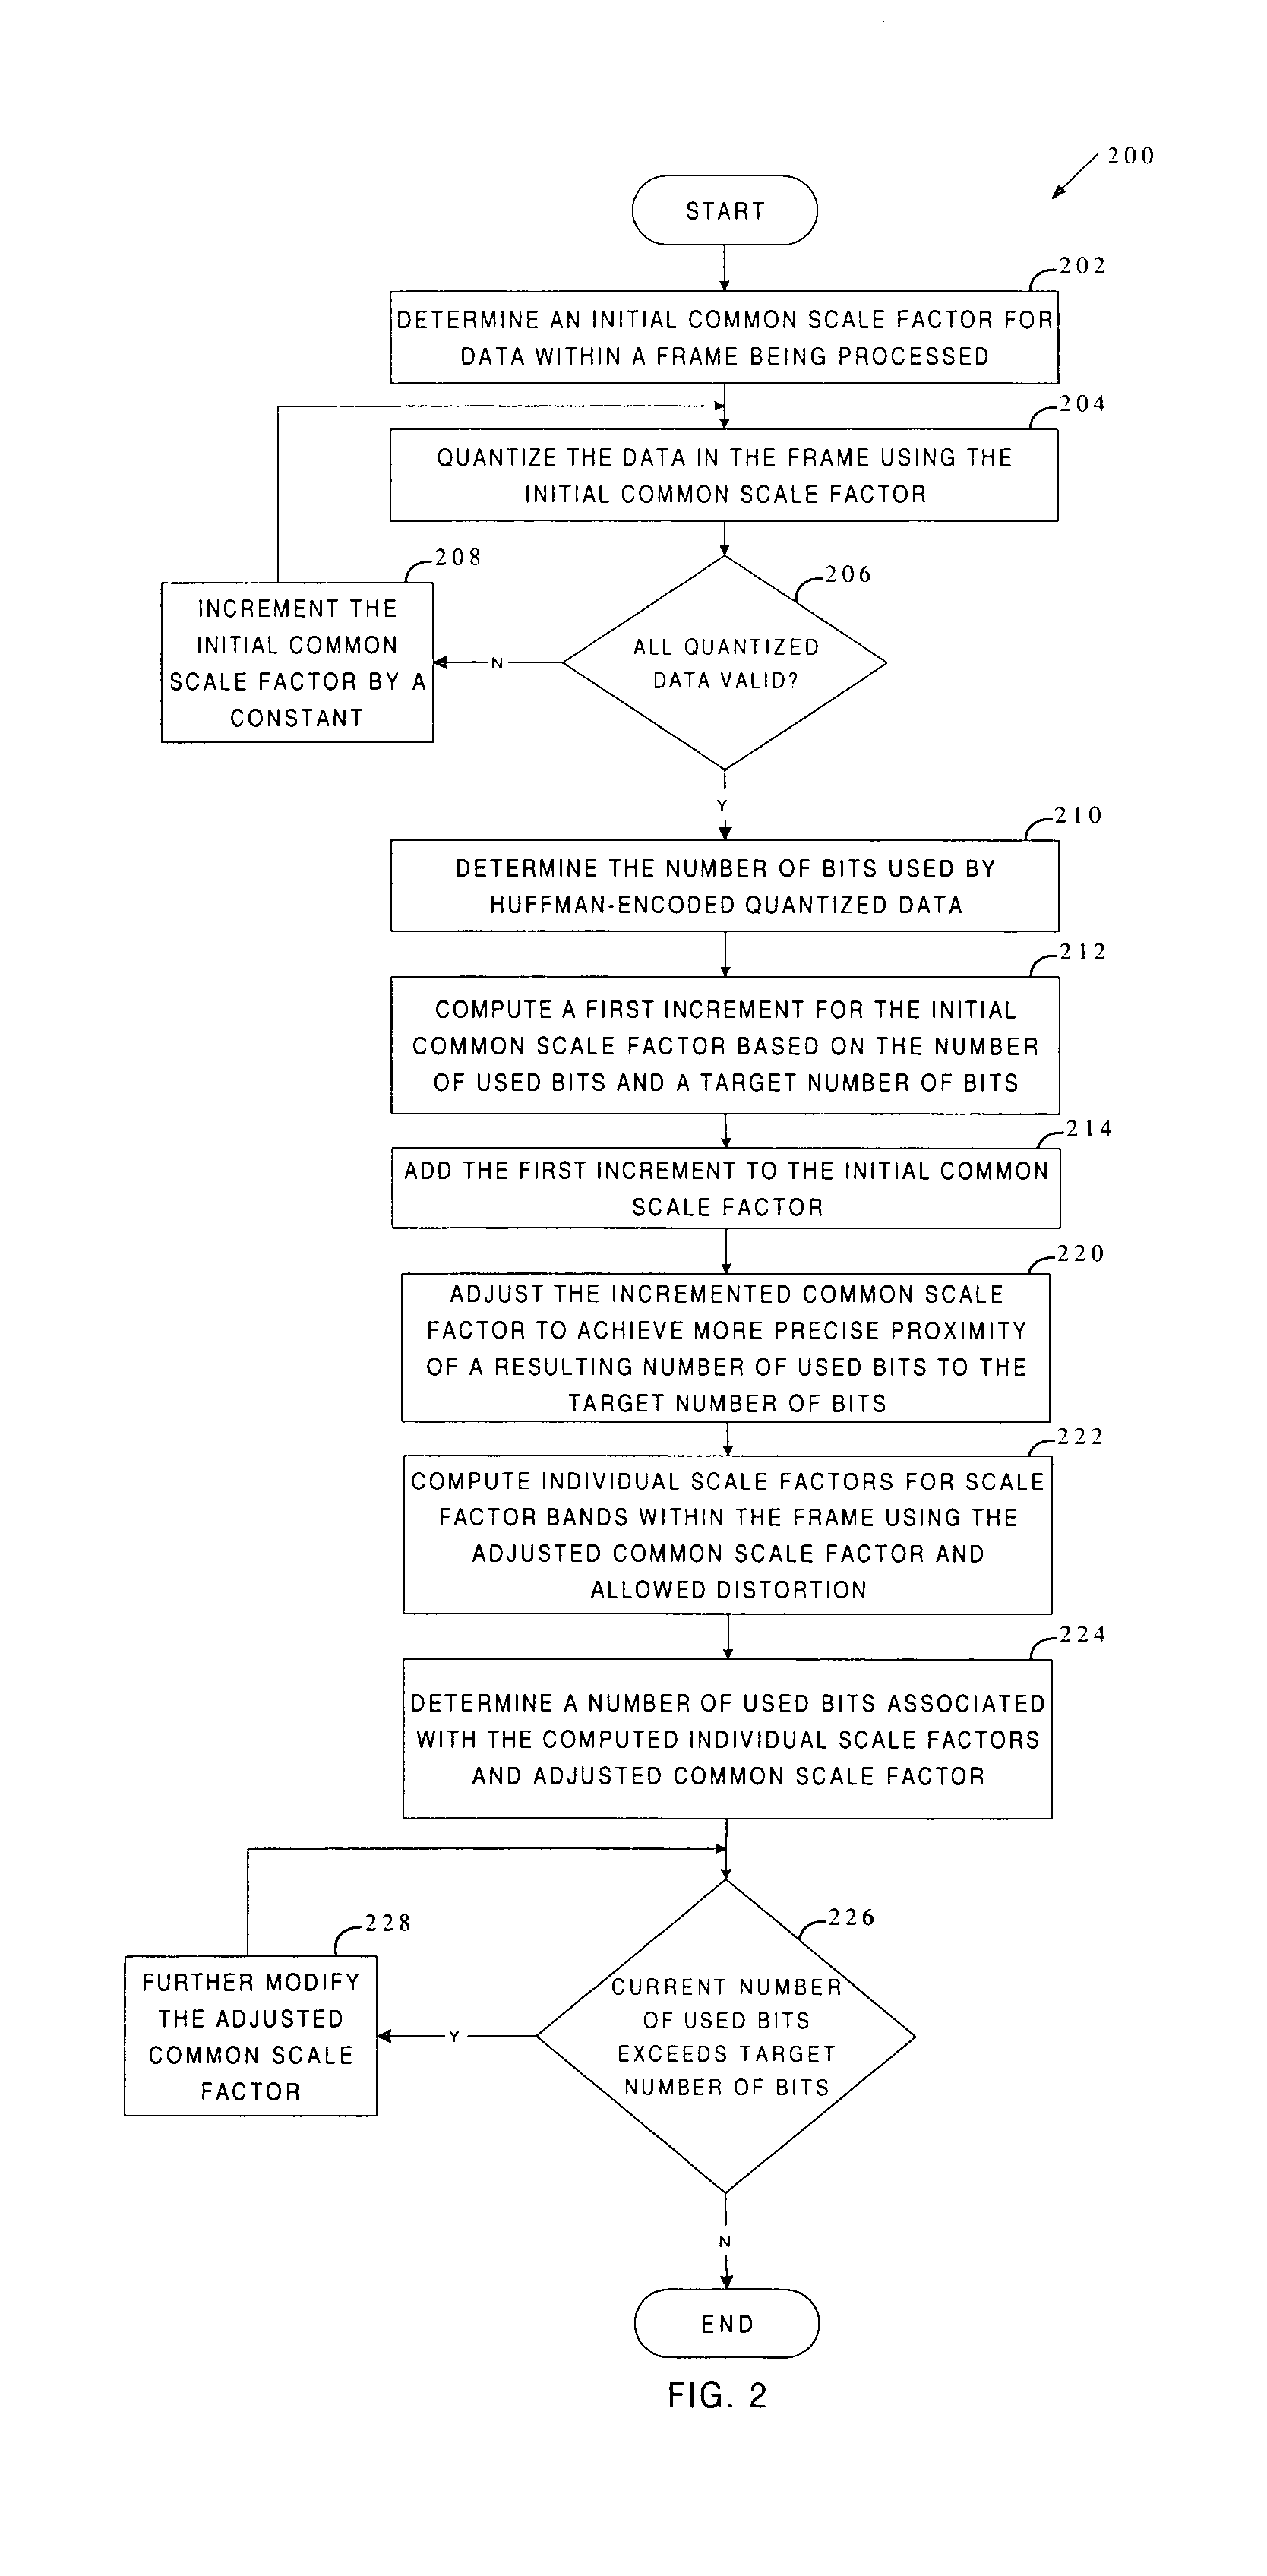 Rate-distortion control scheme in audio encoding